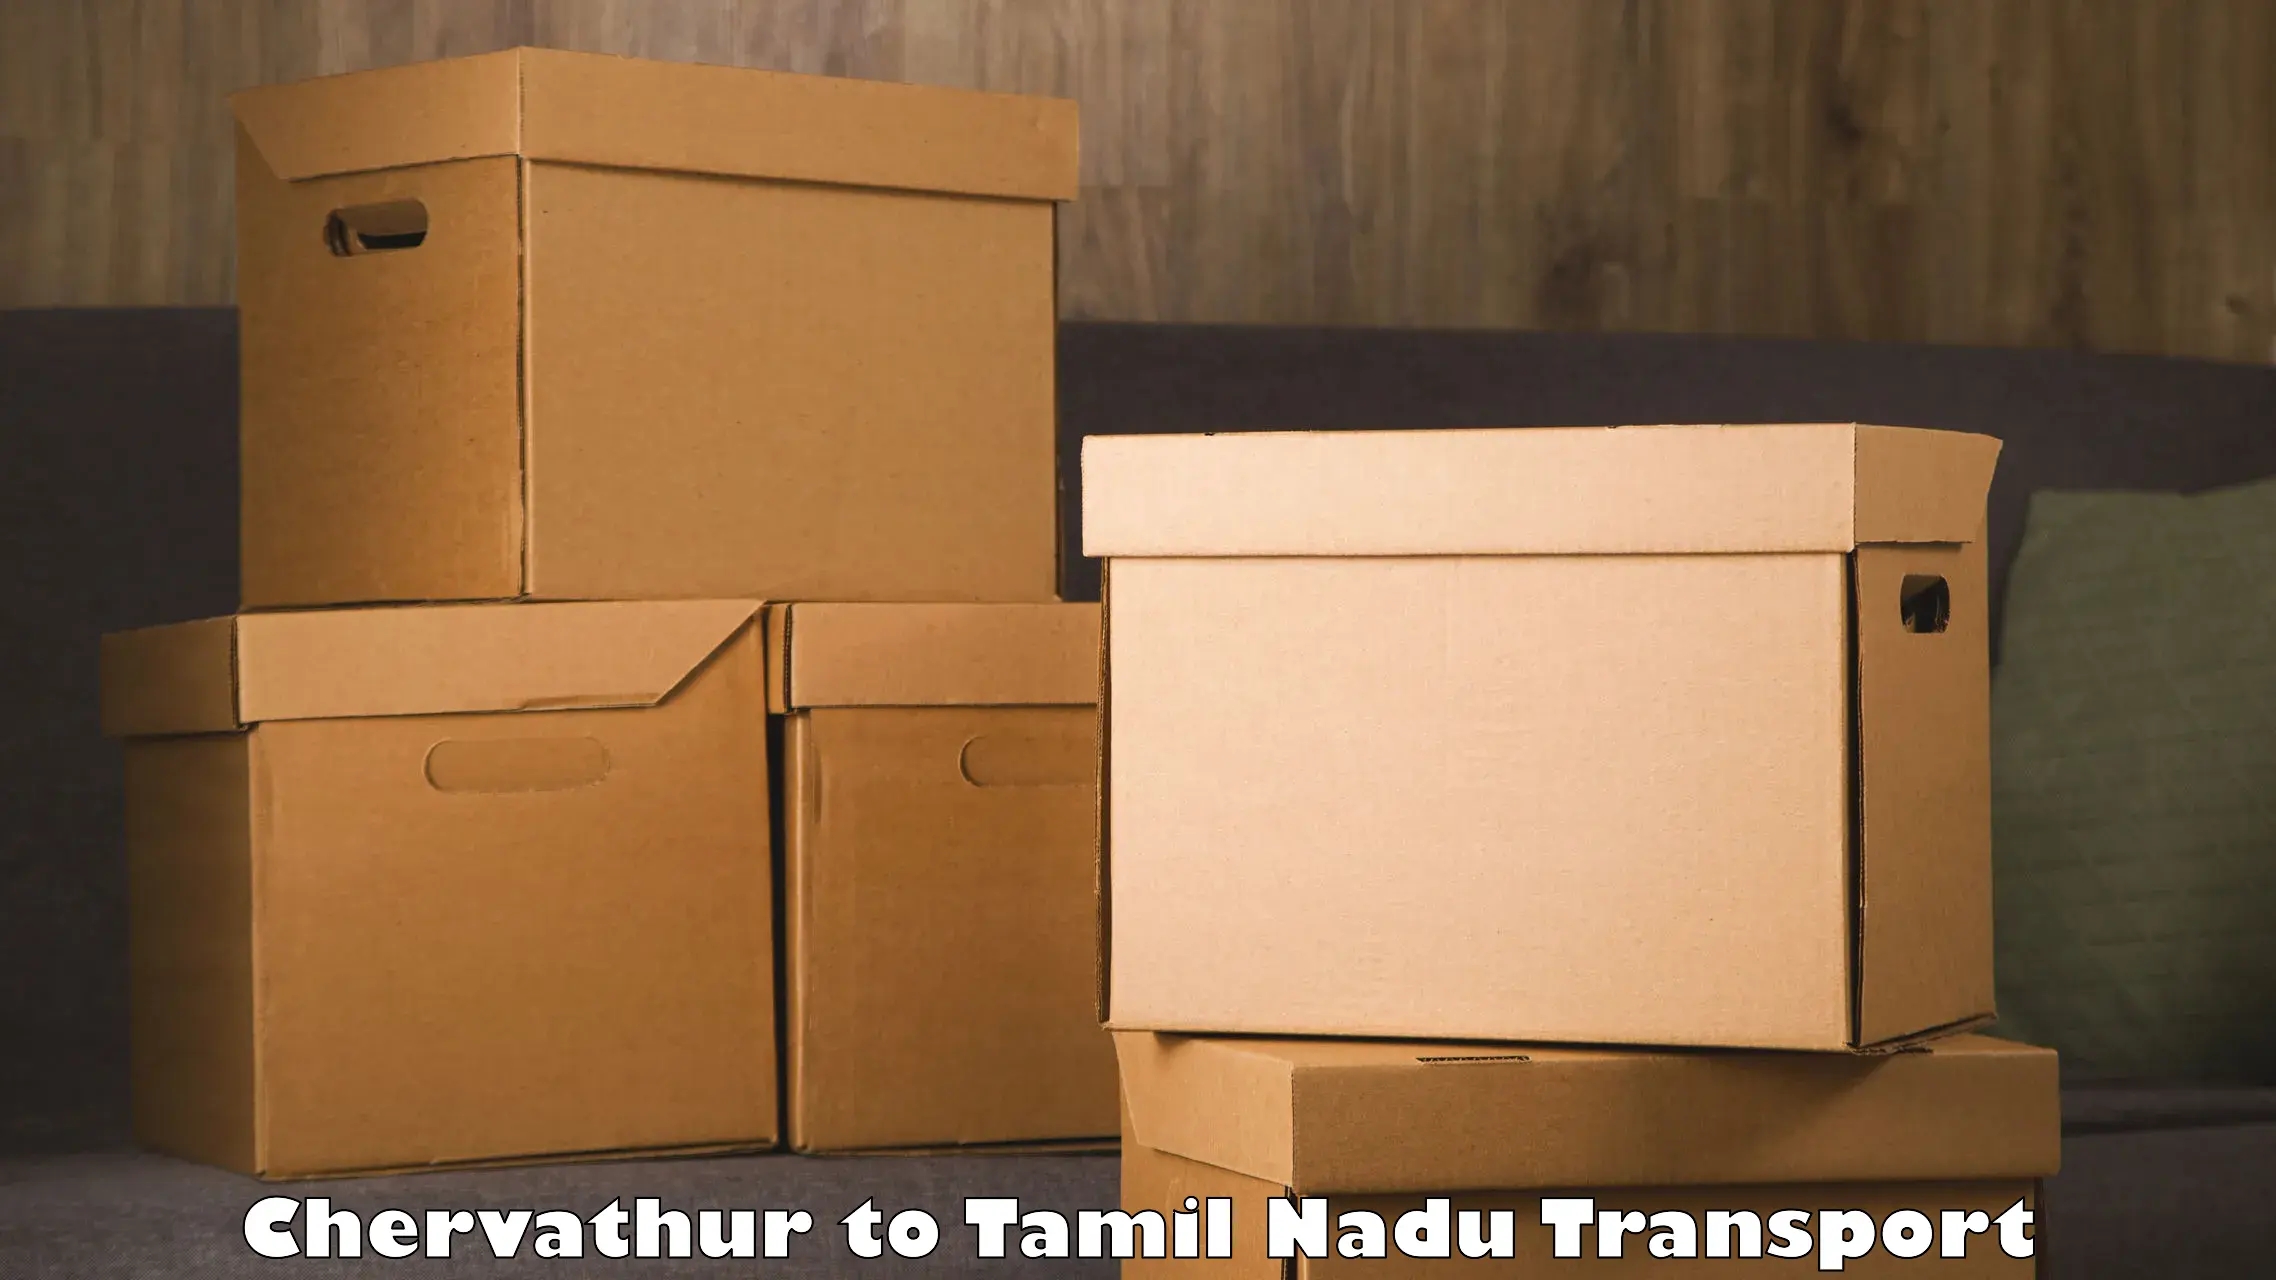 Furniture transport service Chervathur to Vellore Institute of Technology